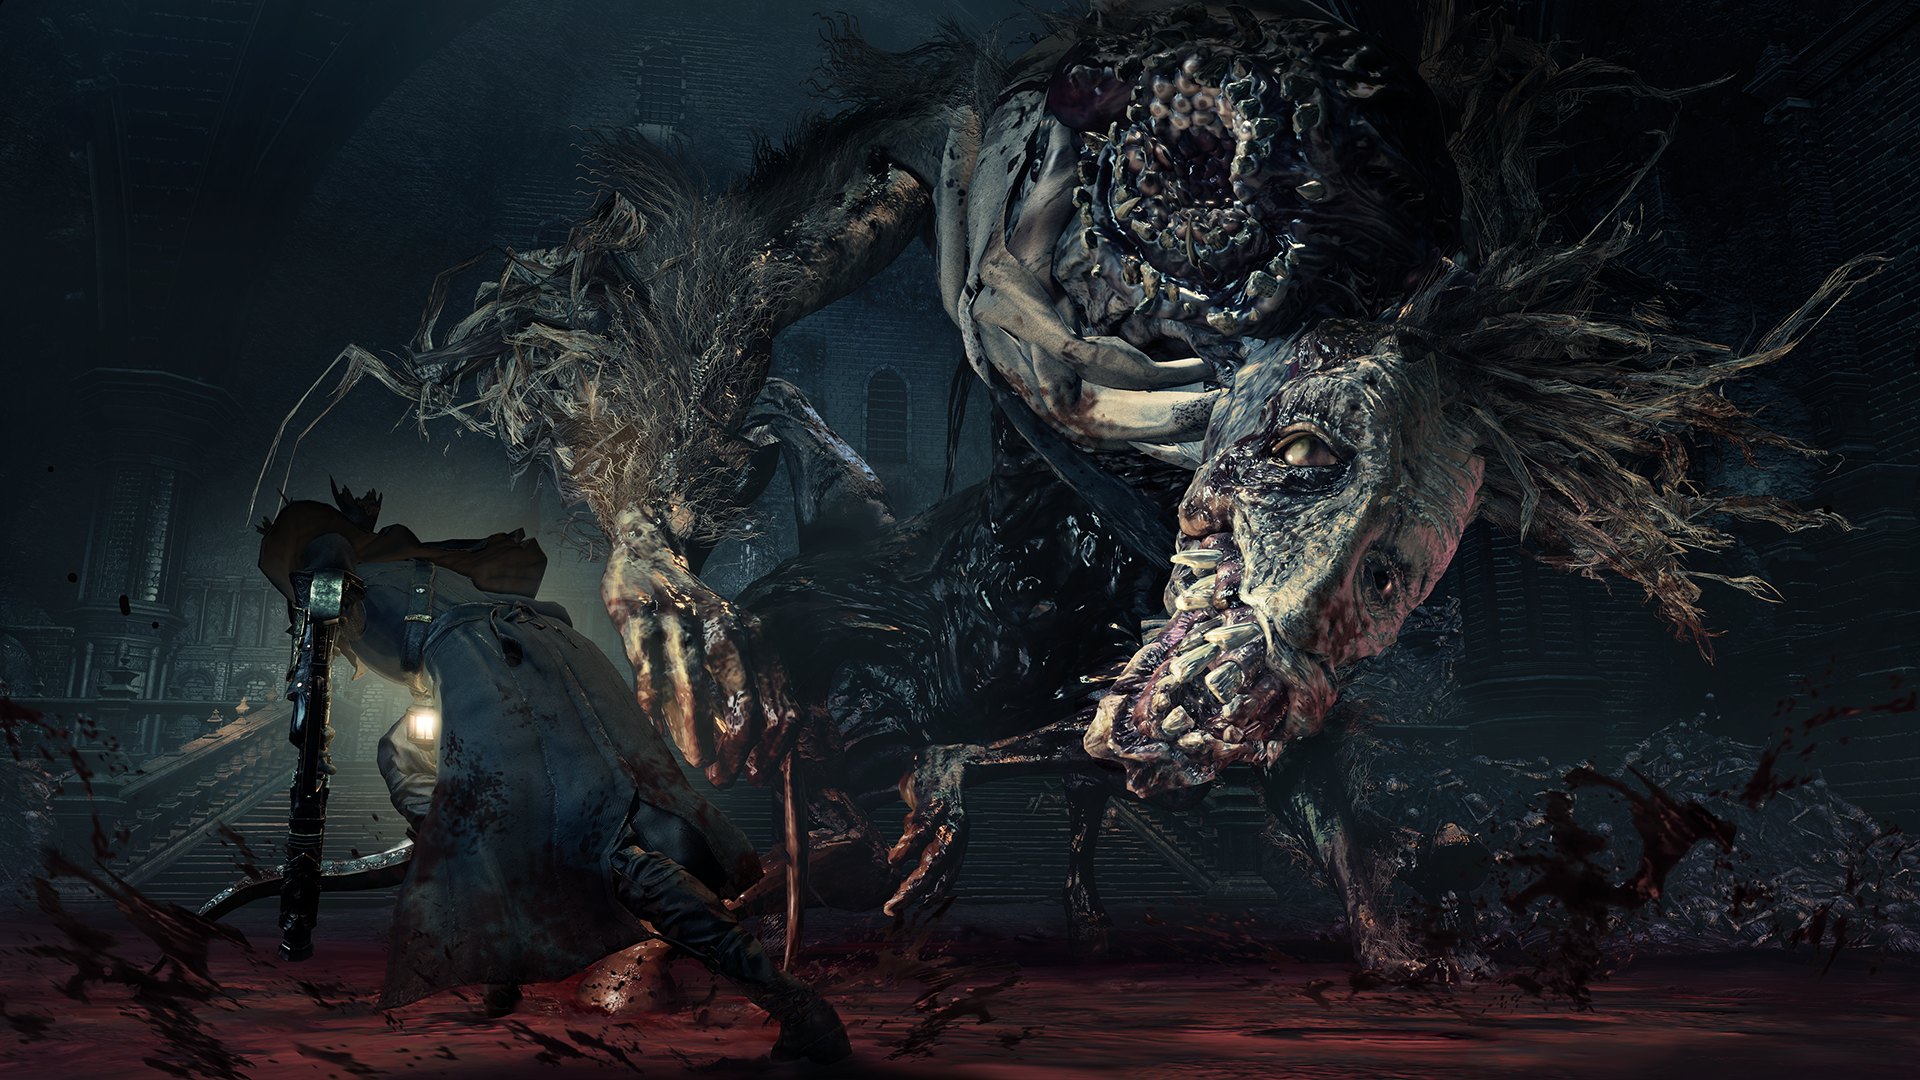 bloodborne-the-old-hunters-expansion-out-on-november-24-video-screenshots-491775-3.jpg